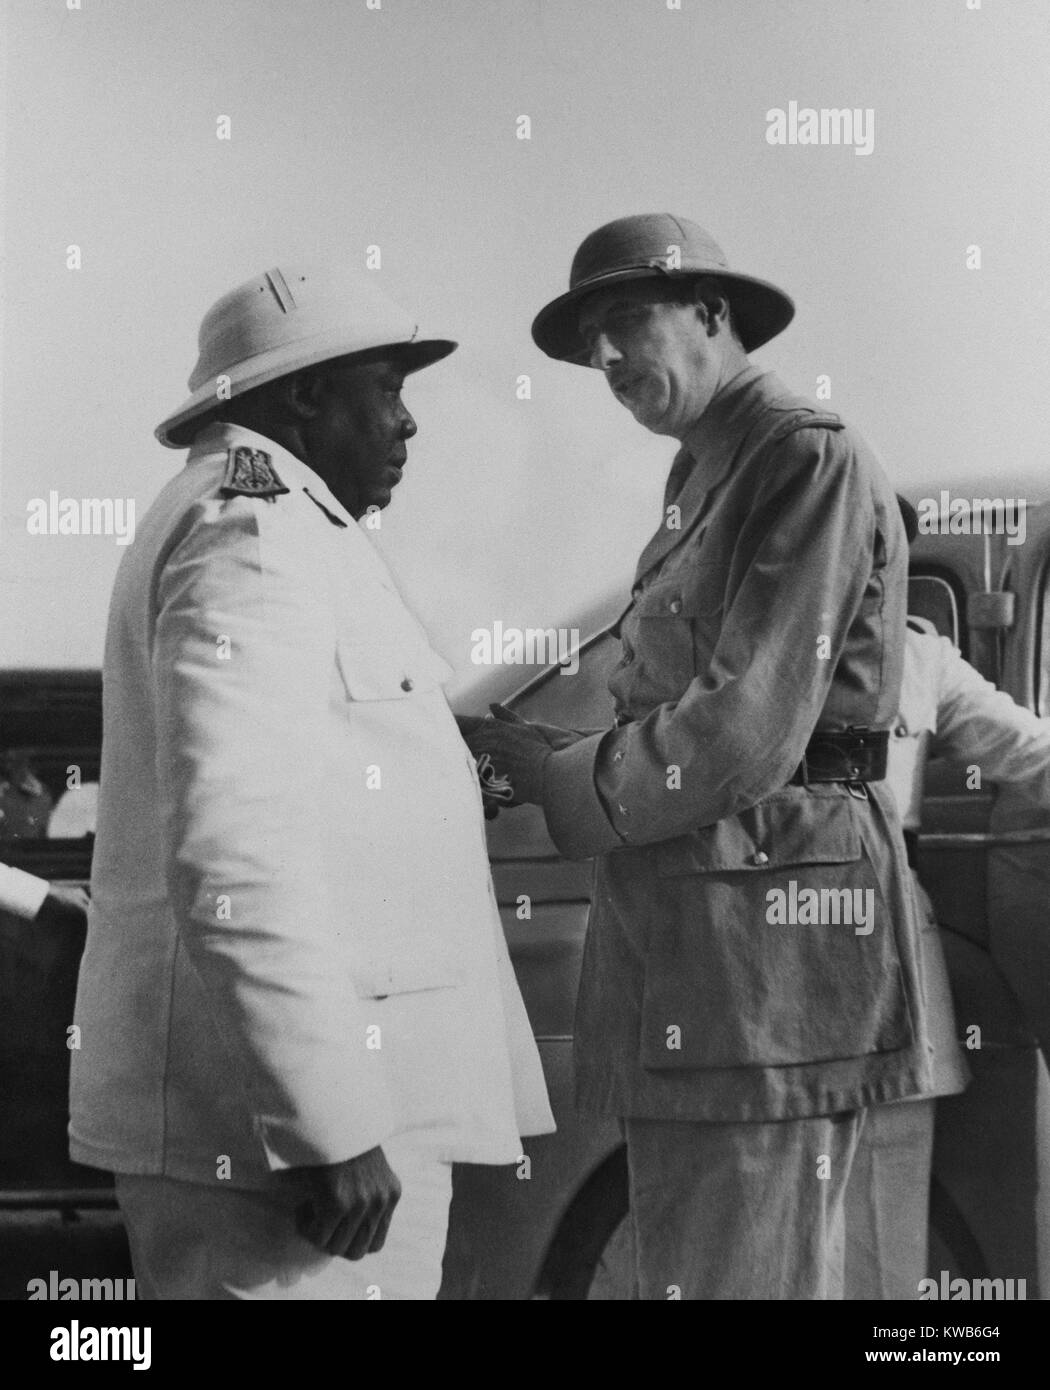 Charles de Gaulle, chief of the Free France, in Chad with Governor-General Eboue. Eboue, a native of French Guinea, was the first African leader to rally to the Free French cause. Ca. 1940-43. World War 2. (BSLOC 2014 8 145) Stock Photo